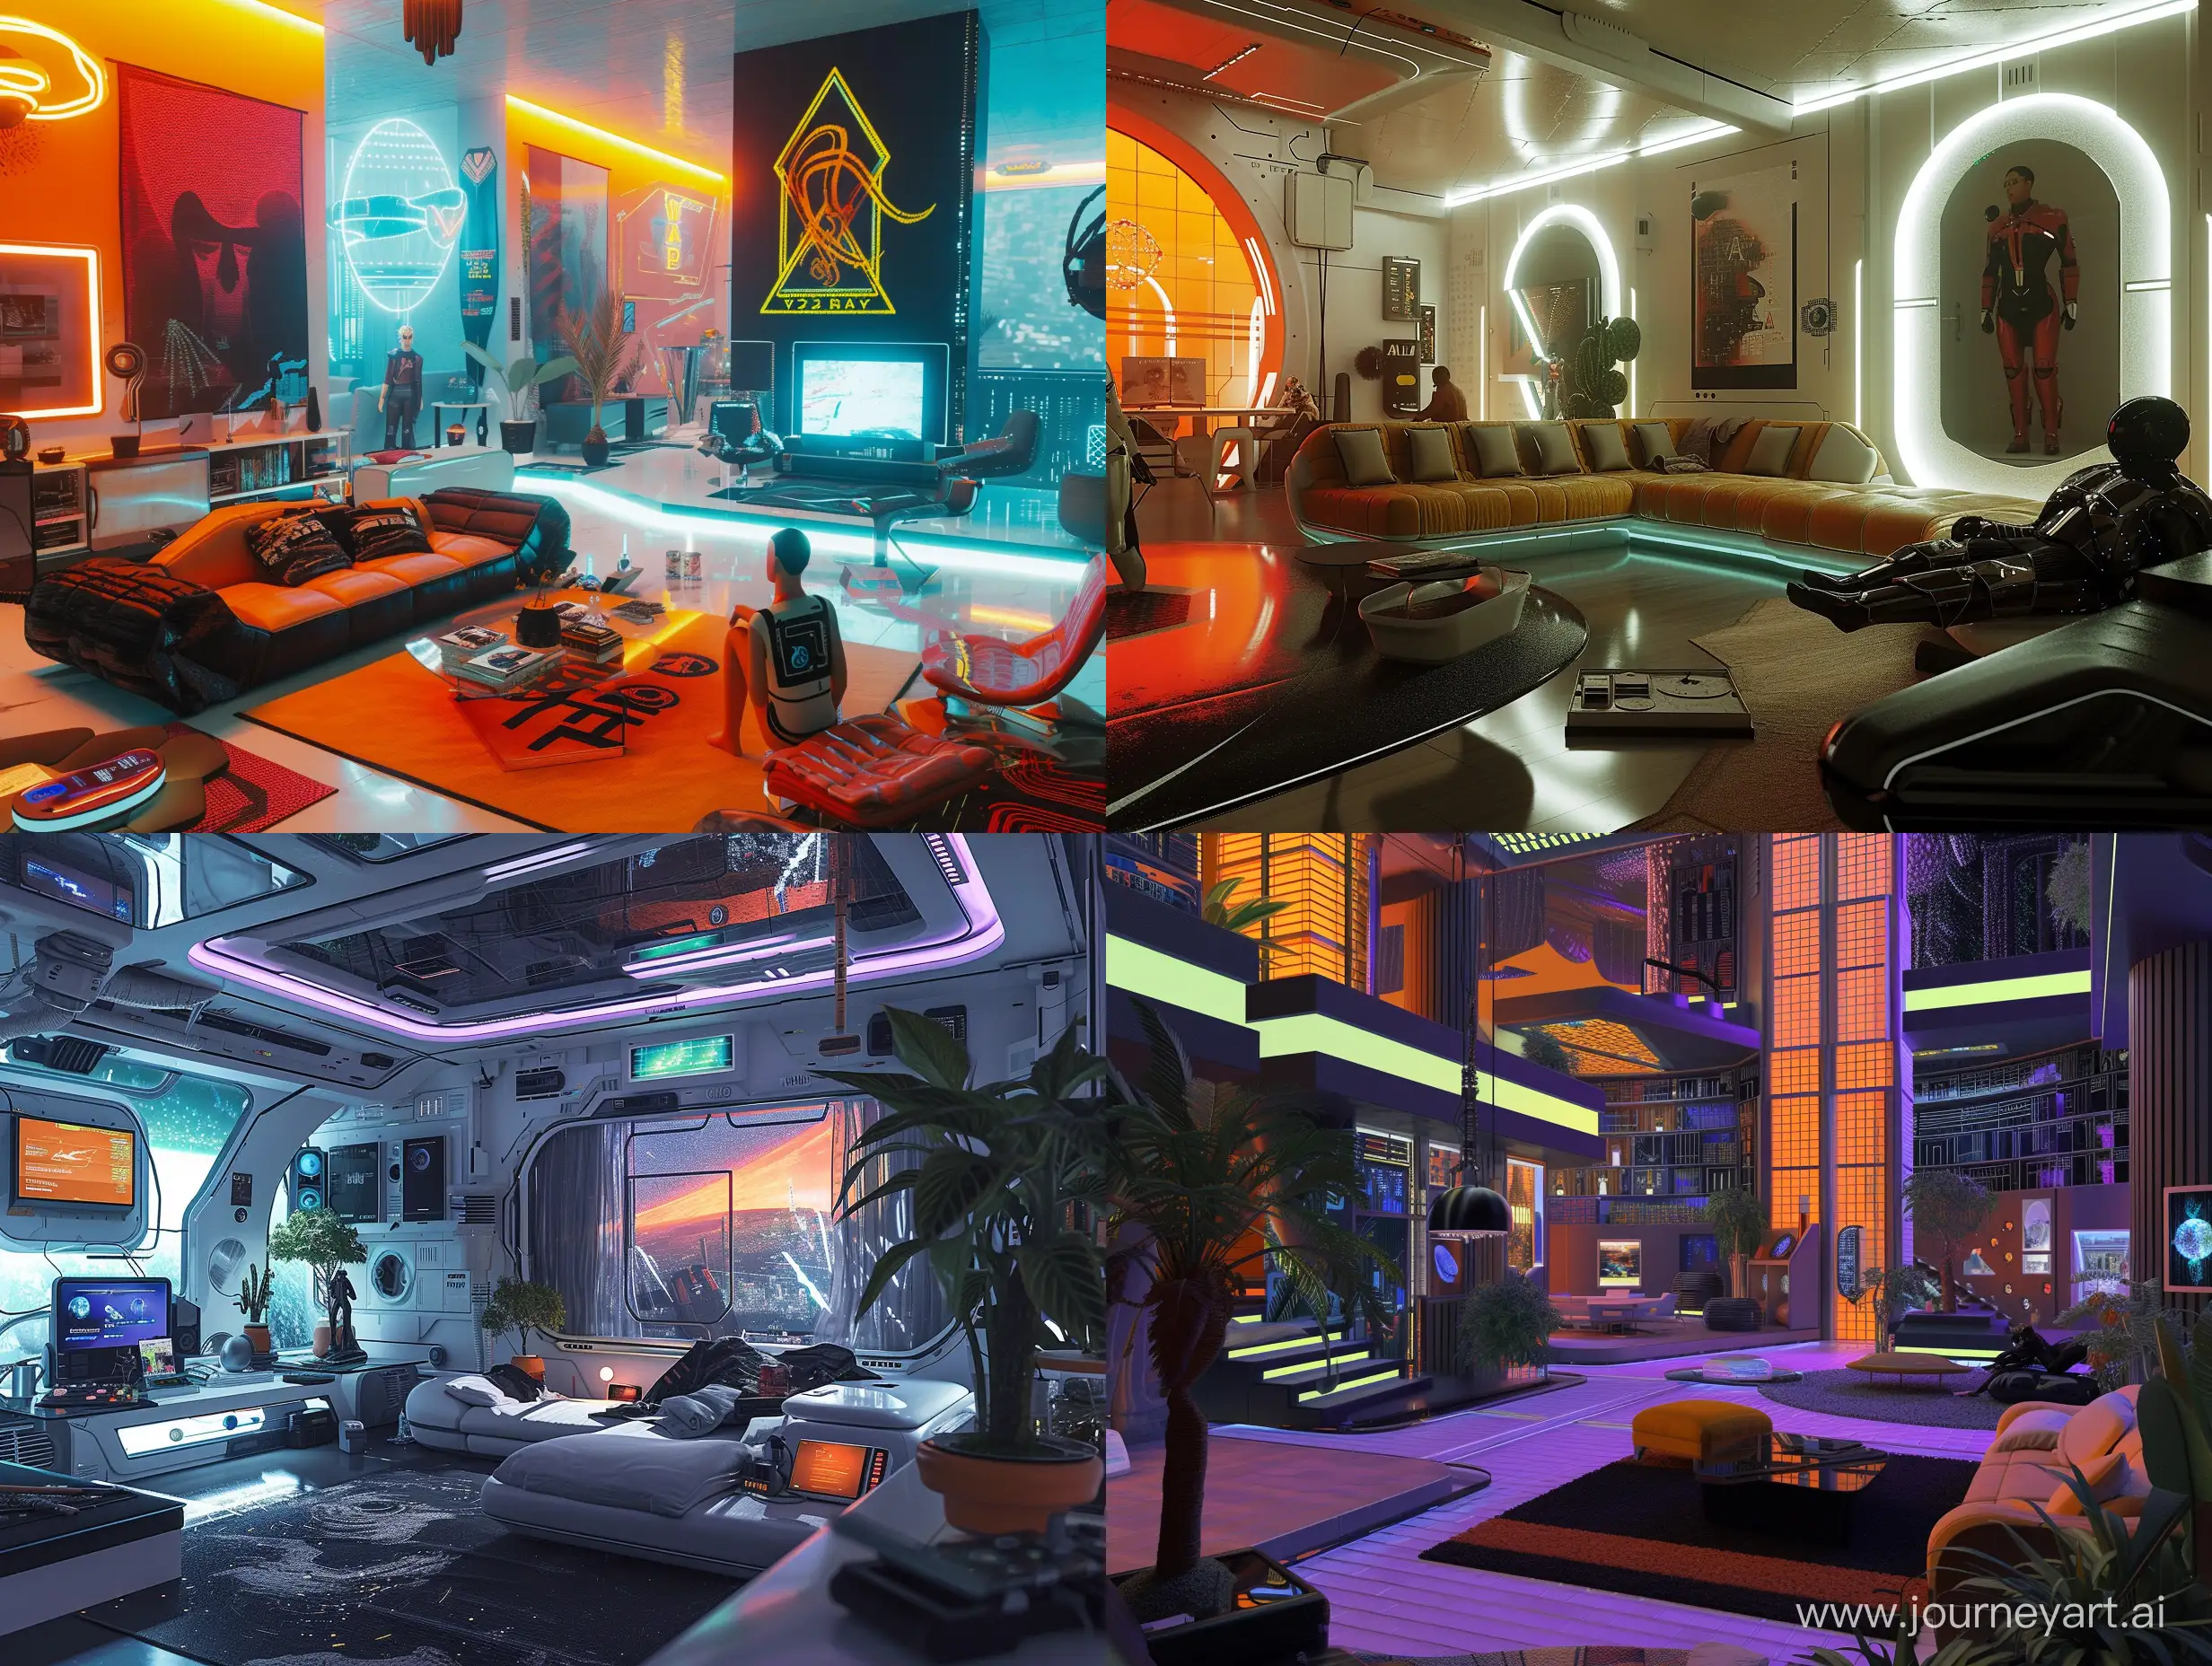 A modern living room with a futuristic Y2K aesthetic and various themes, showcasing unique architecture and an atmospheric cybercore vibe. It is a relaxing place where a person is roaming around.

